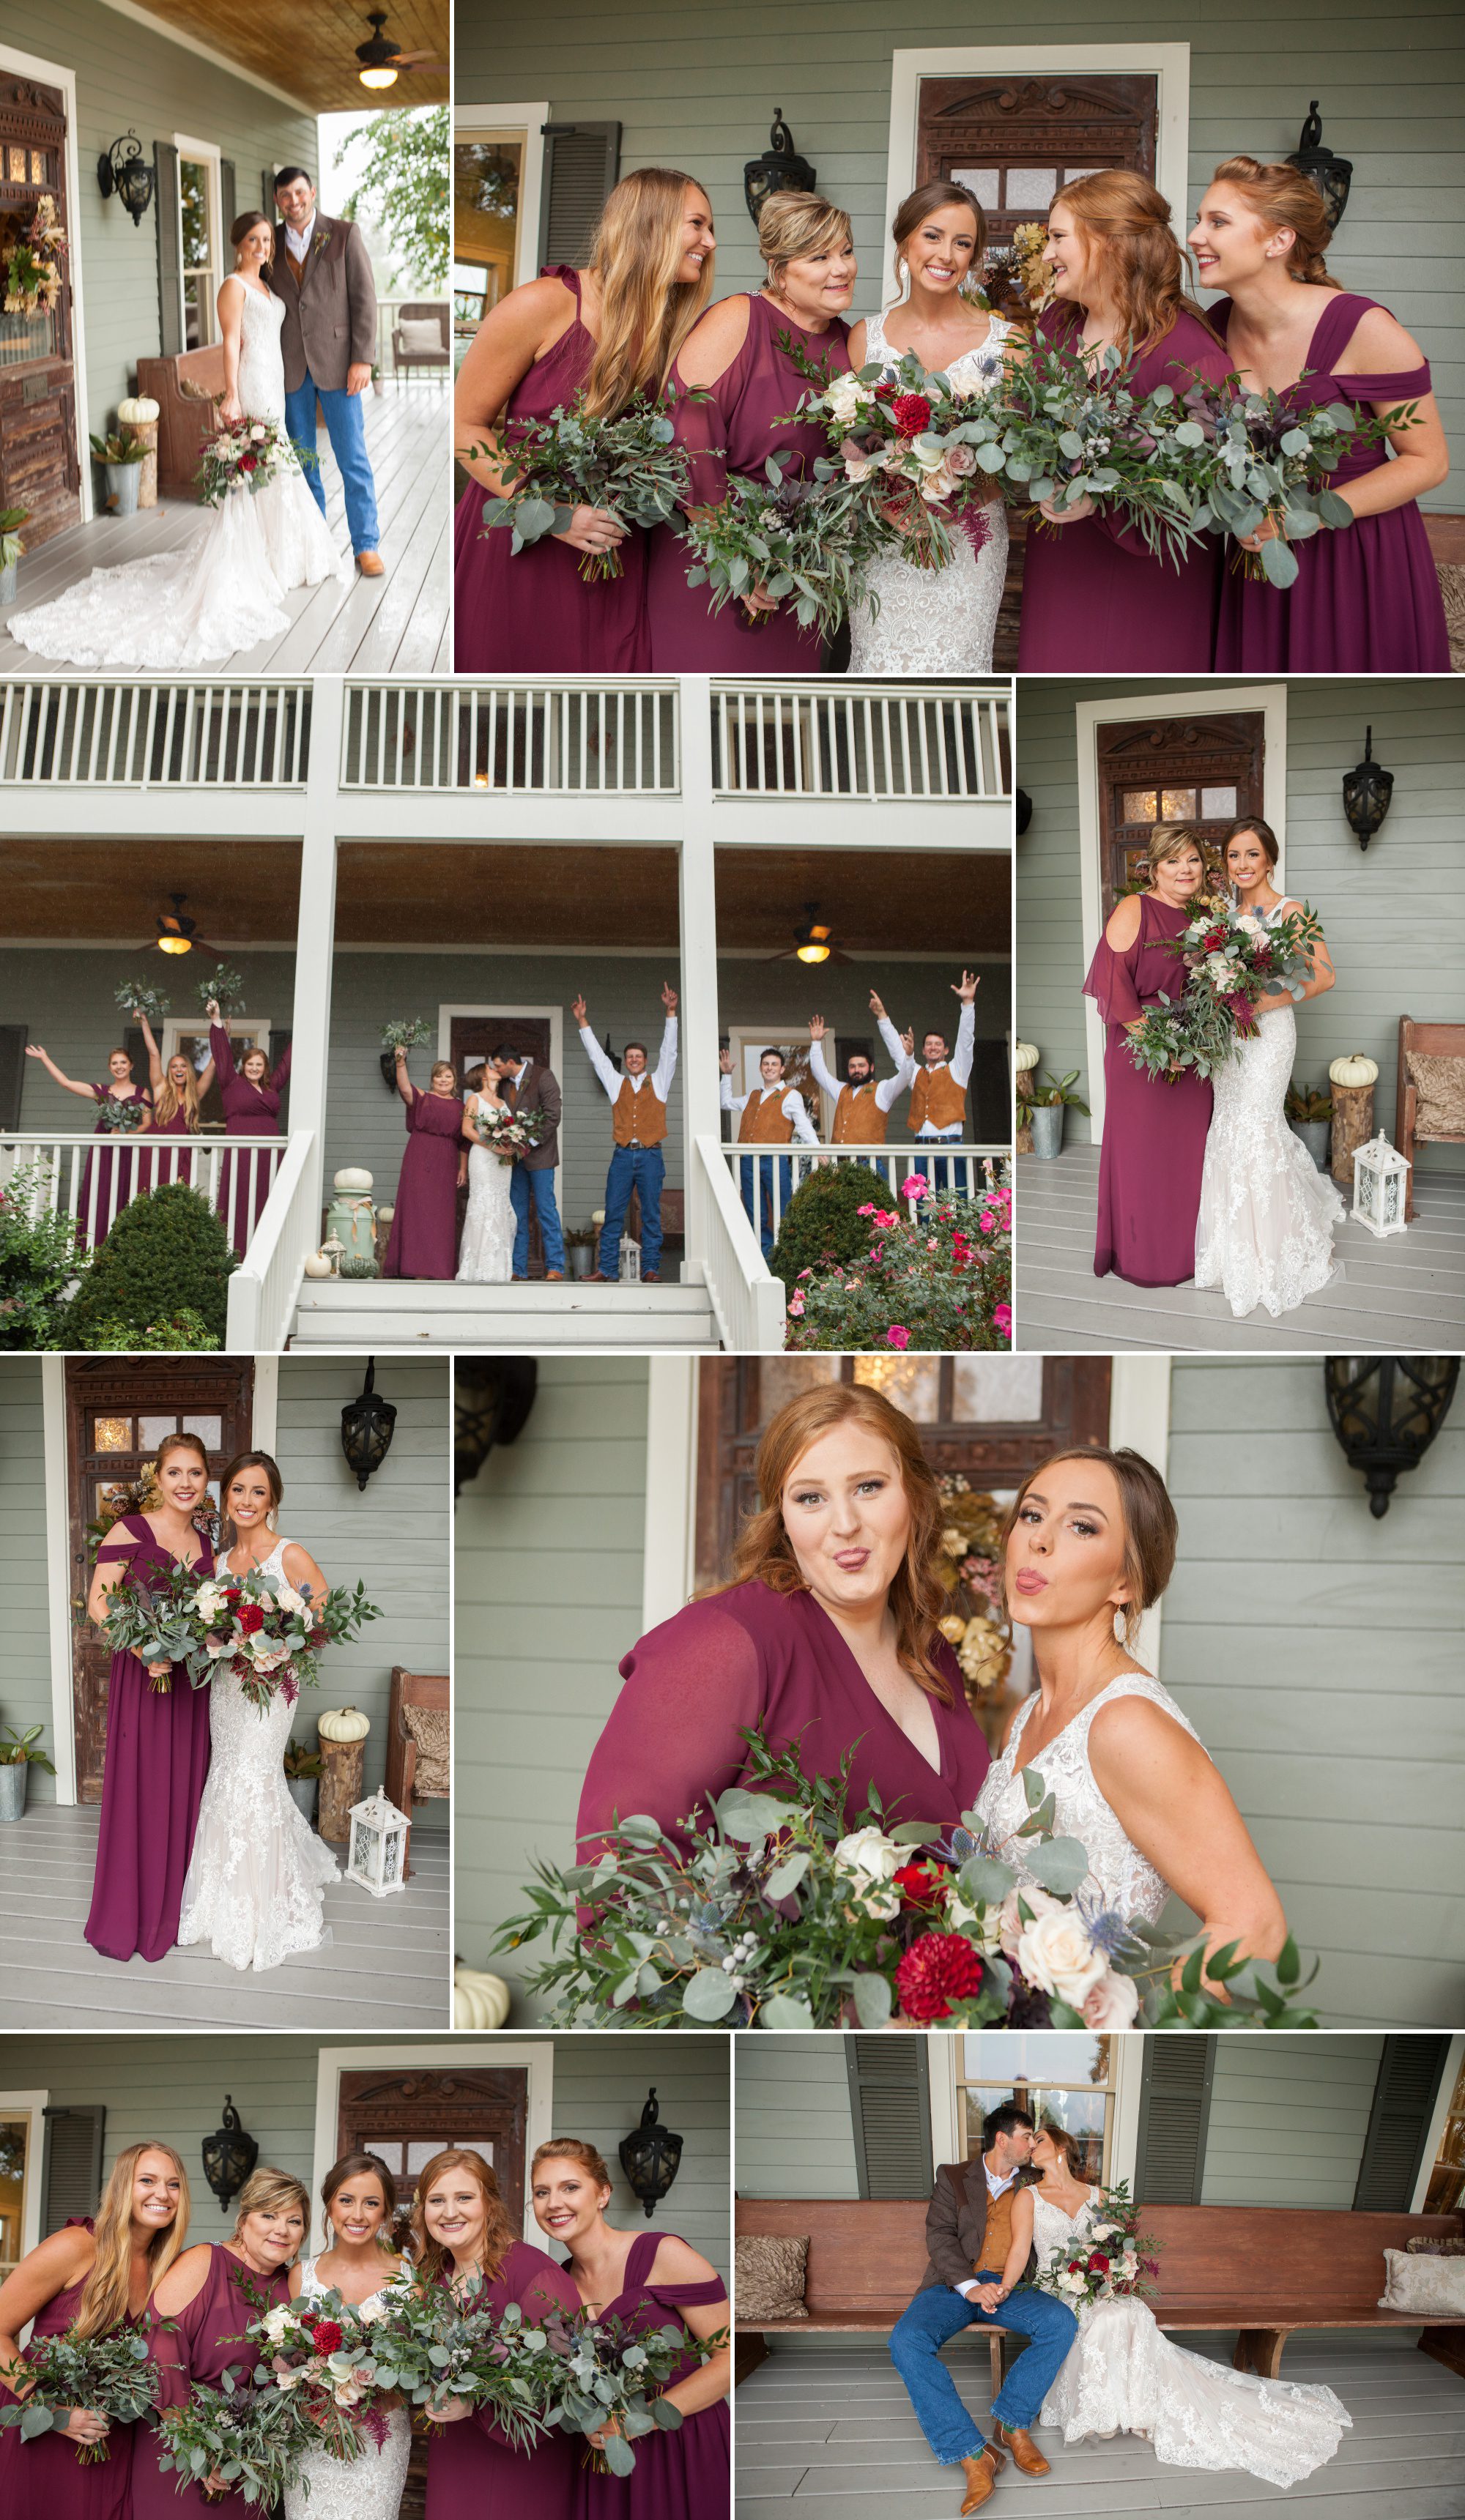 Bride and bridesmaids, bridal party pose for photos before wedding reception details before wedding ceremony photography at Front Porch Farms, Wedding photography by Krista Lee